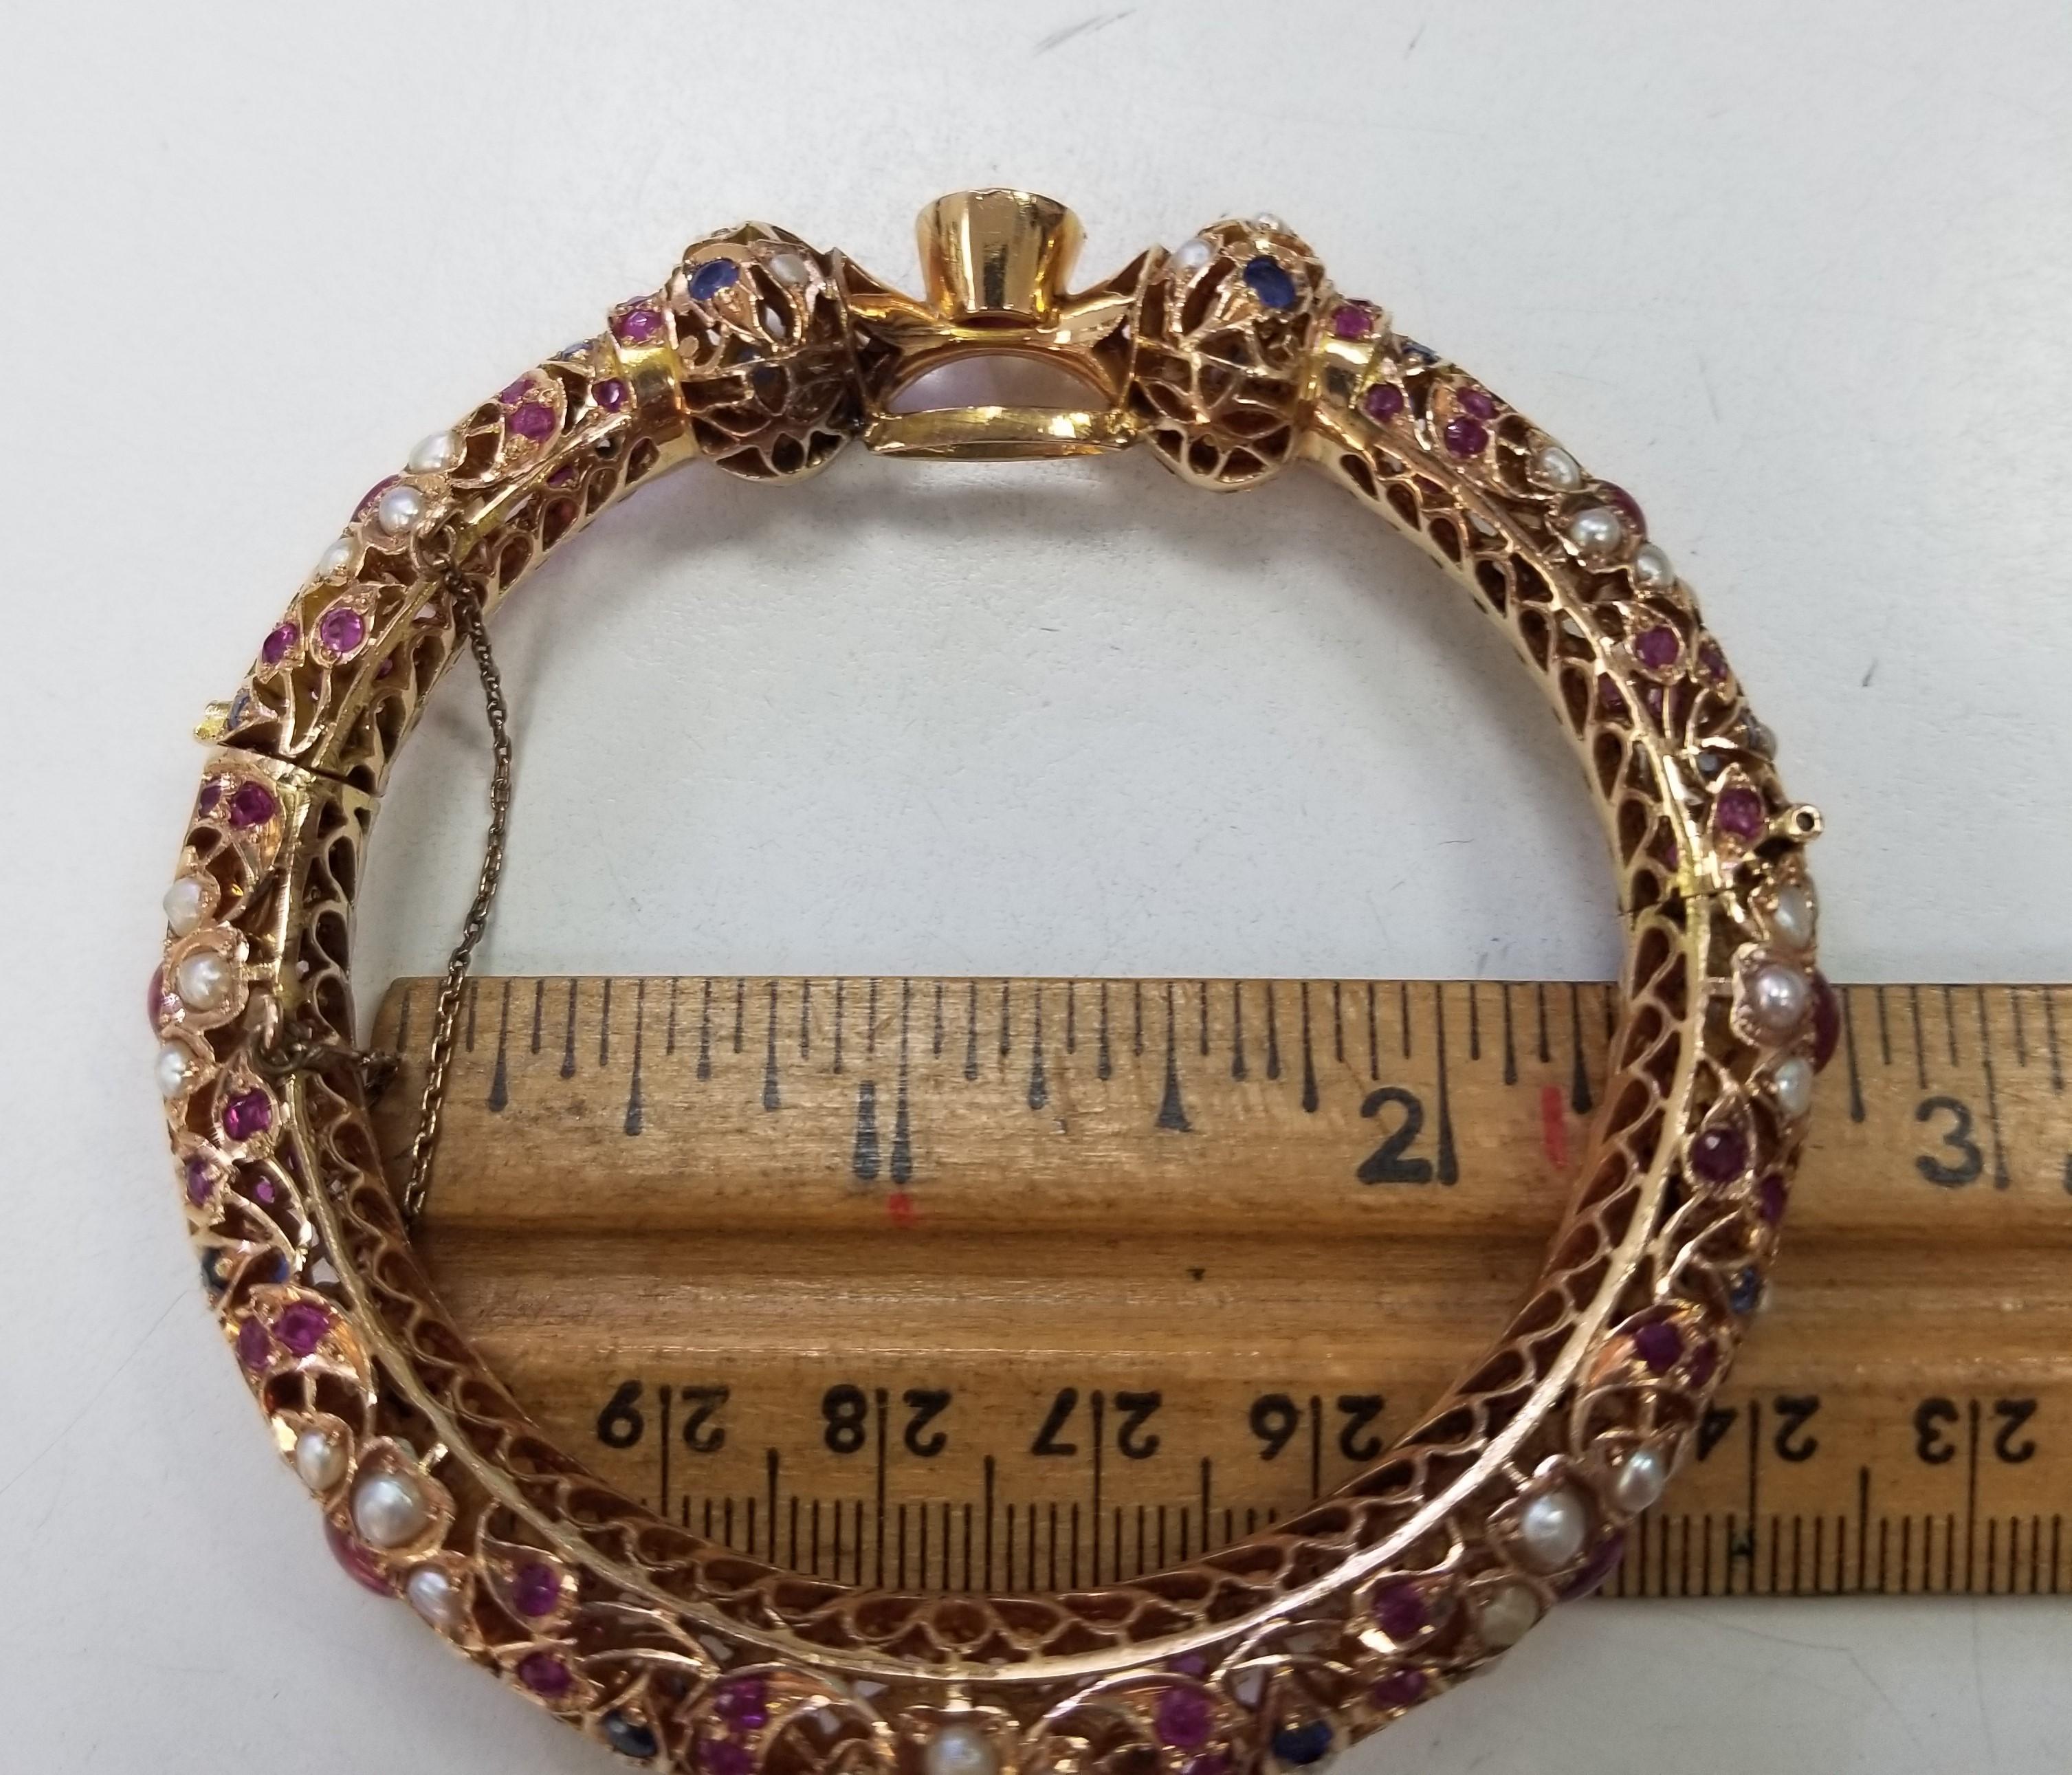 Artist Vintage 14 Karat Yellow Gold Ruby, Sapphire and Pearl Bangle form the 